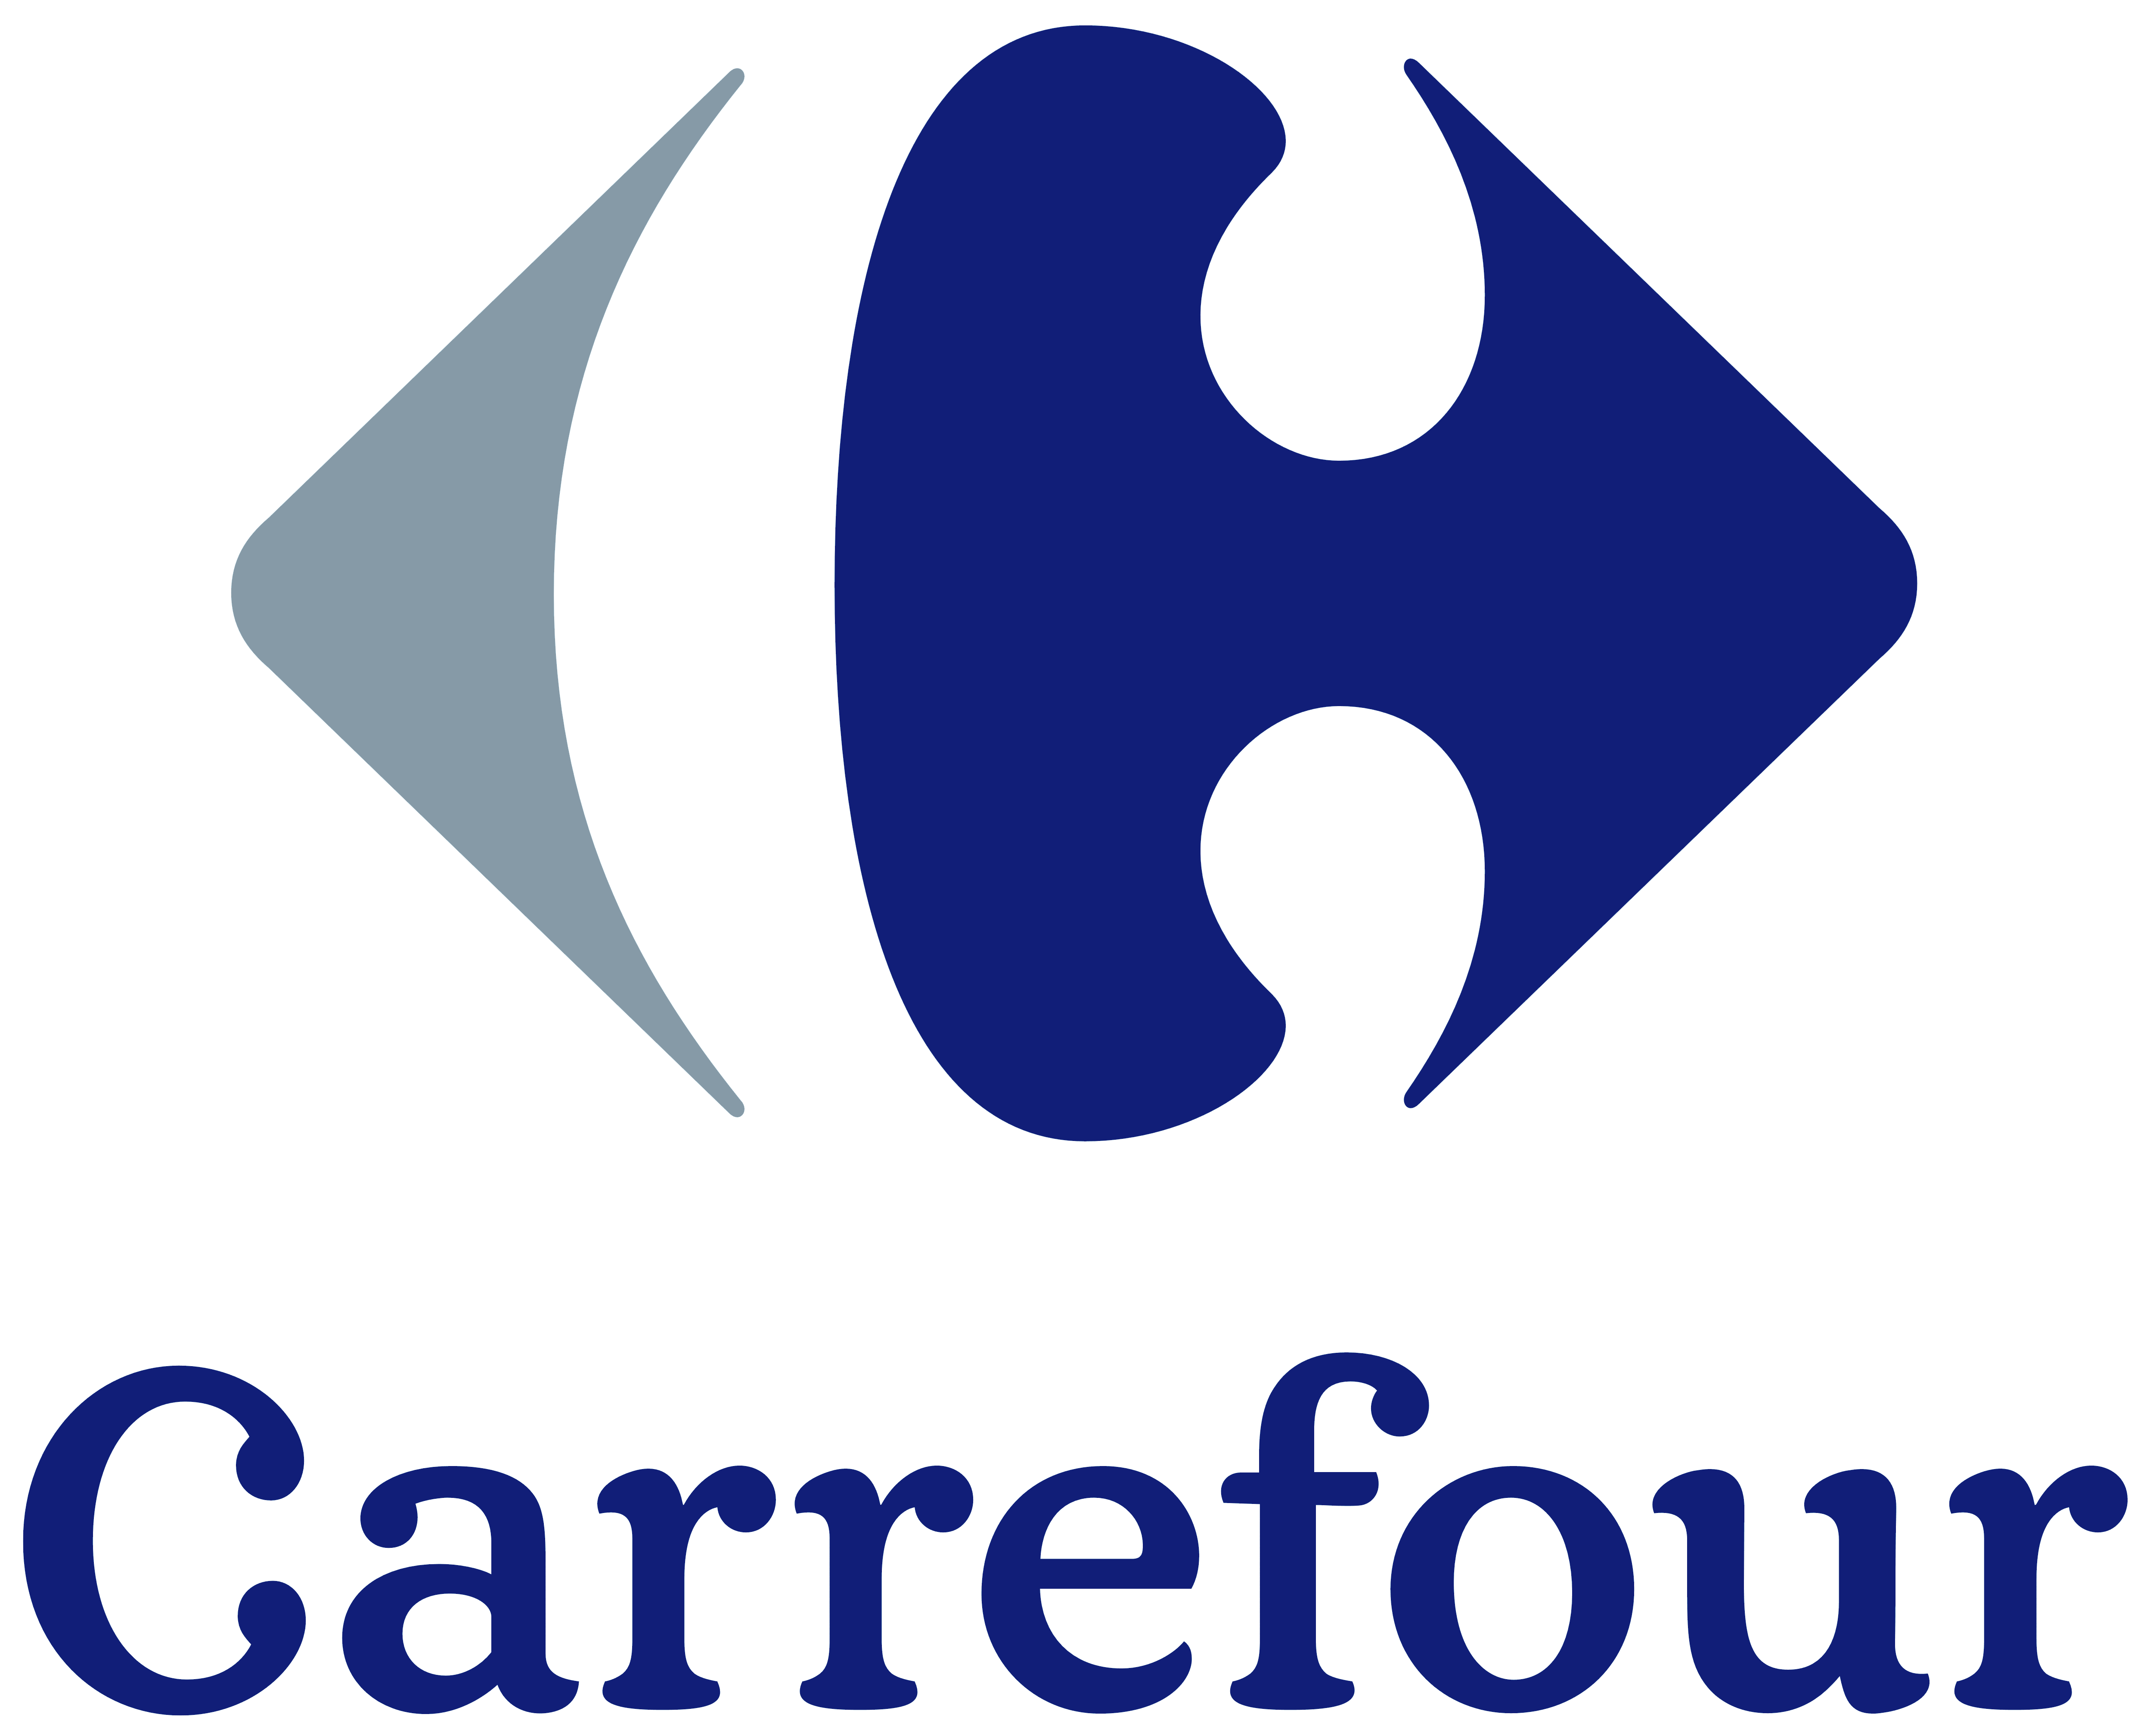 Carrefour Logo - Png And Vect